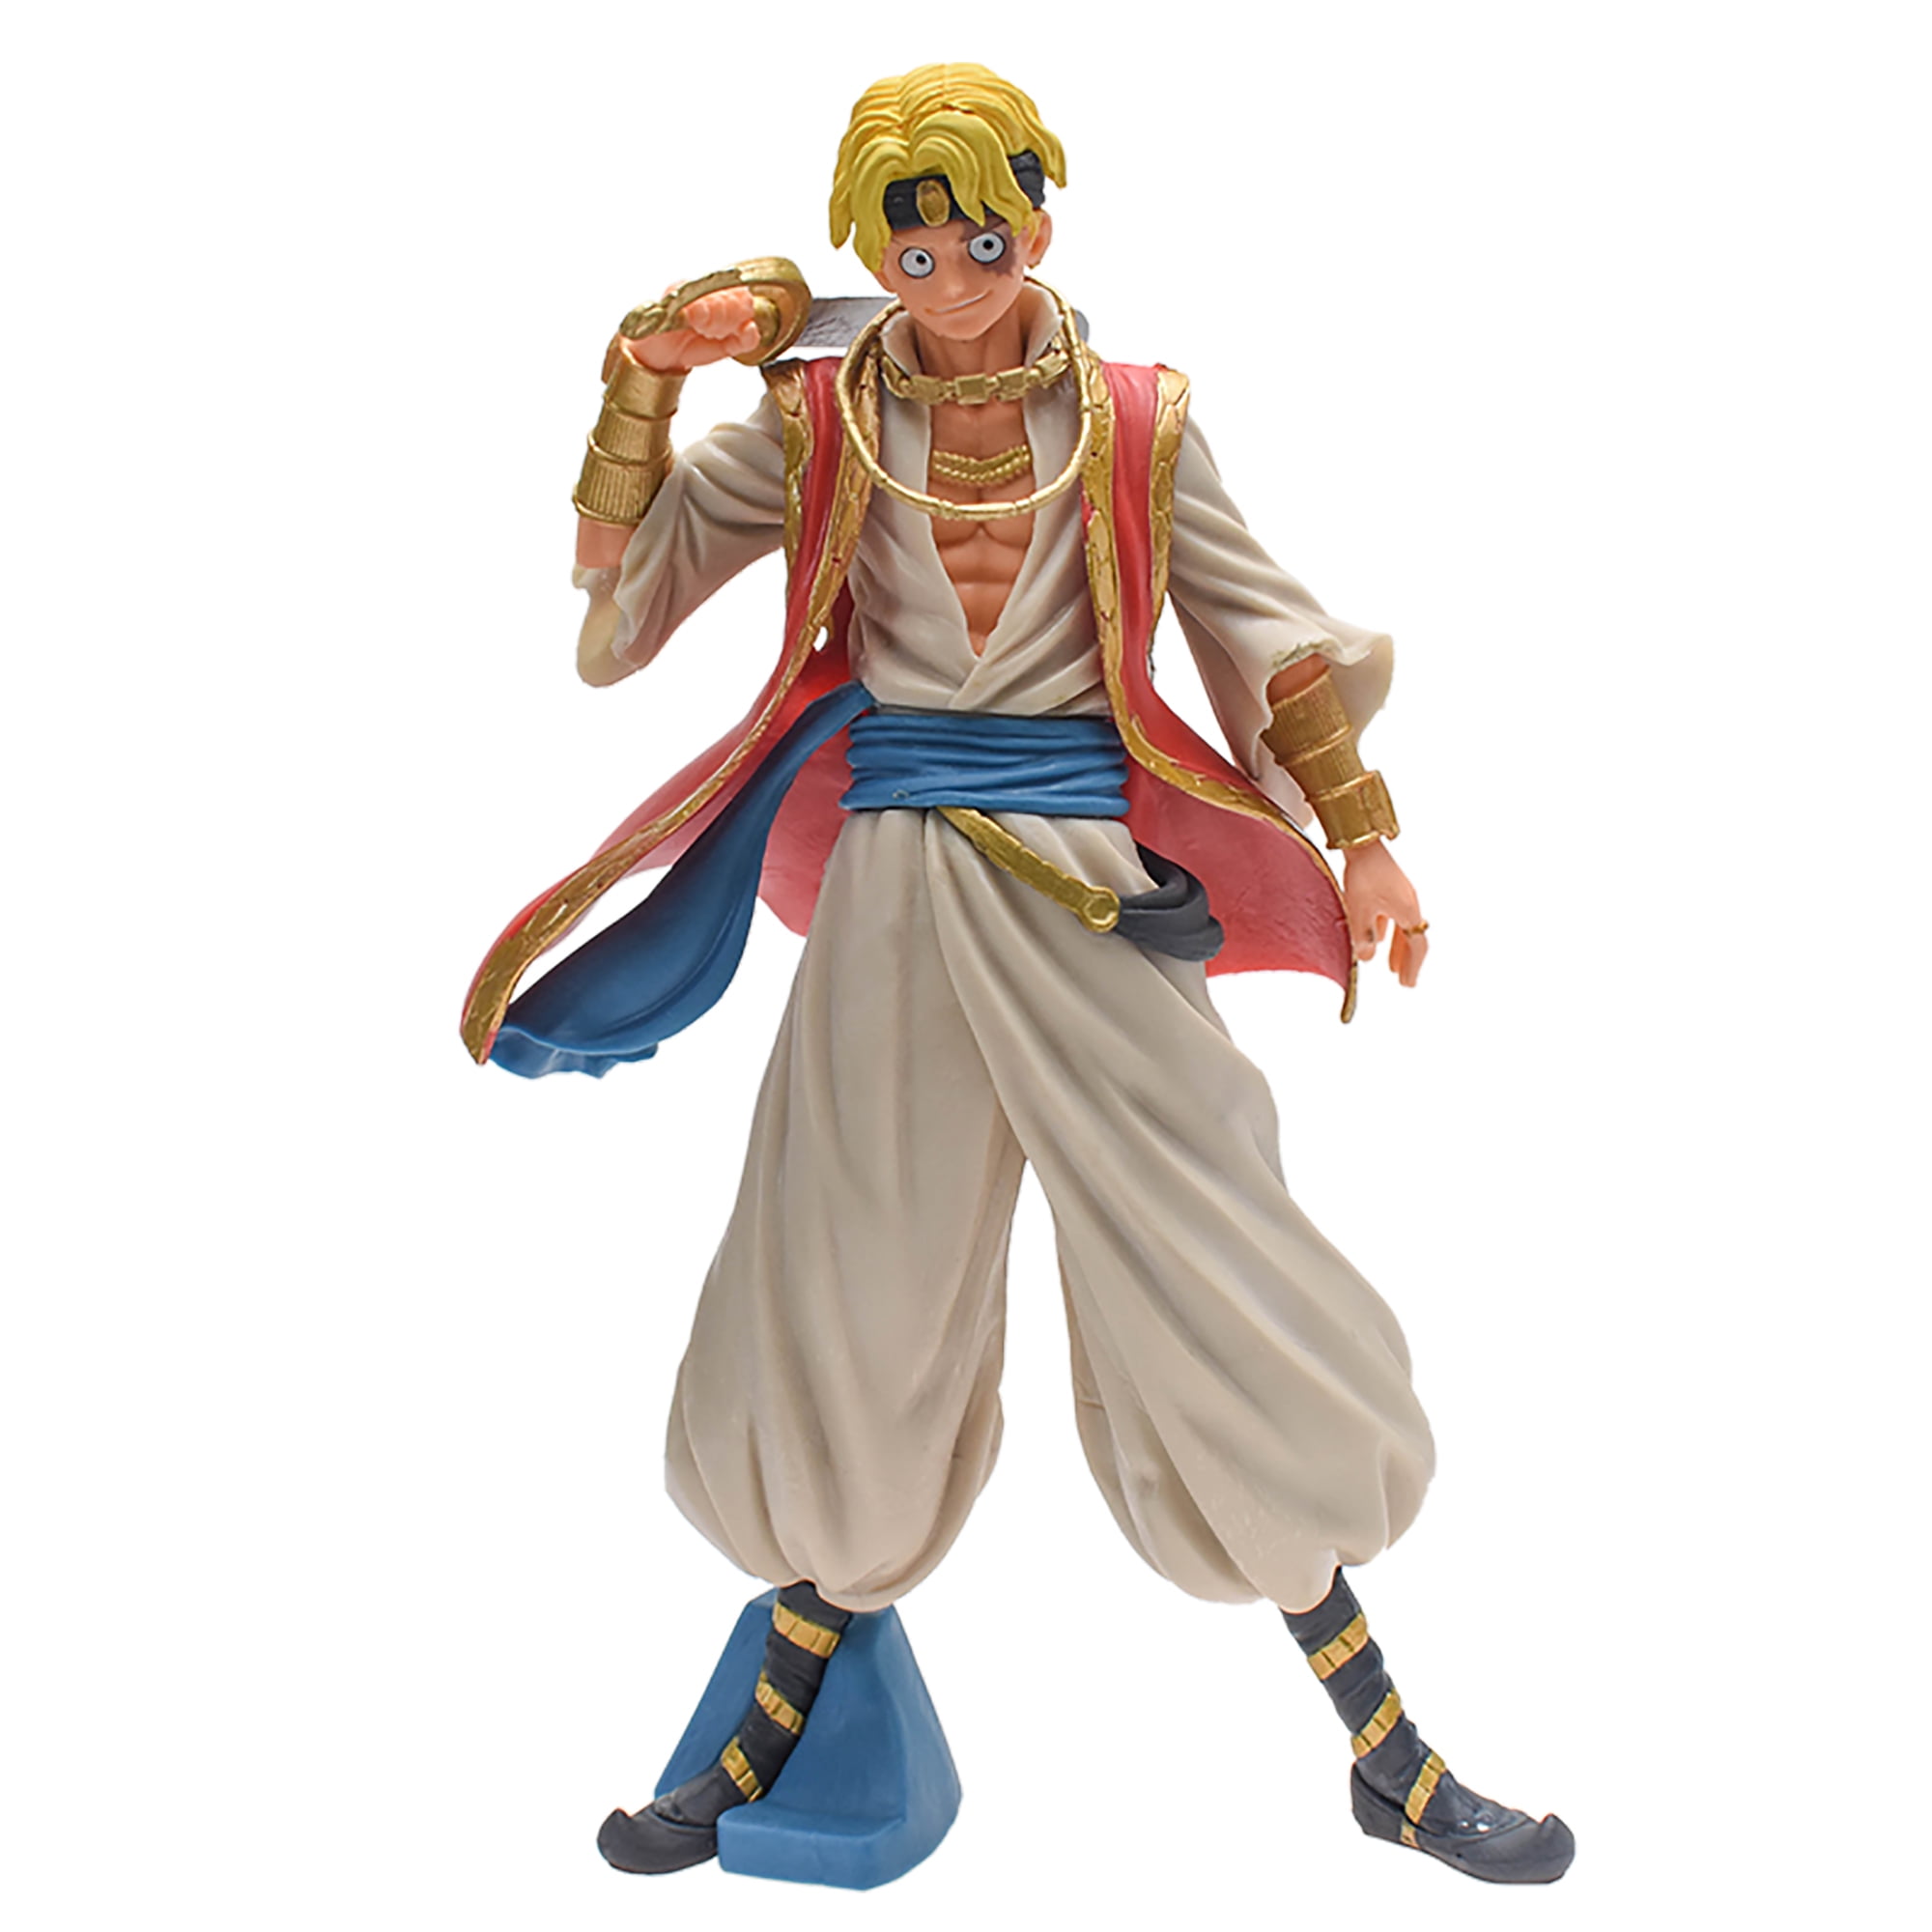 Anime One Piece Sabo Movable Action Figure Toys Model Figurine Statue Decor Gift 